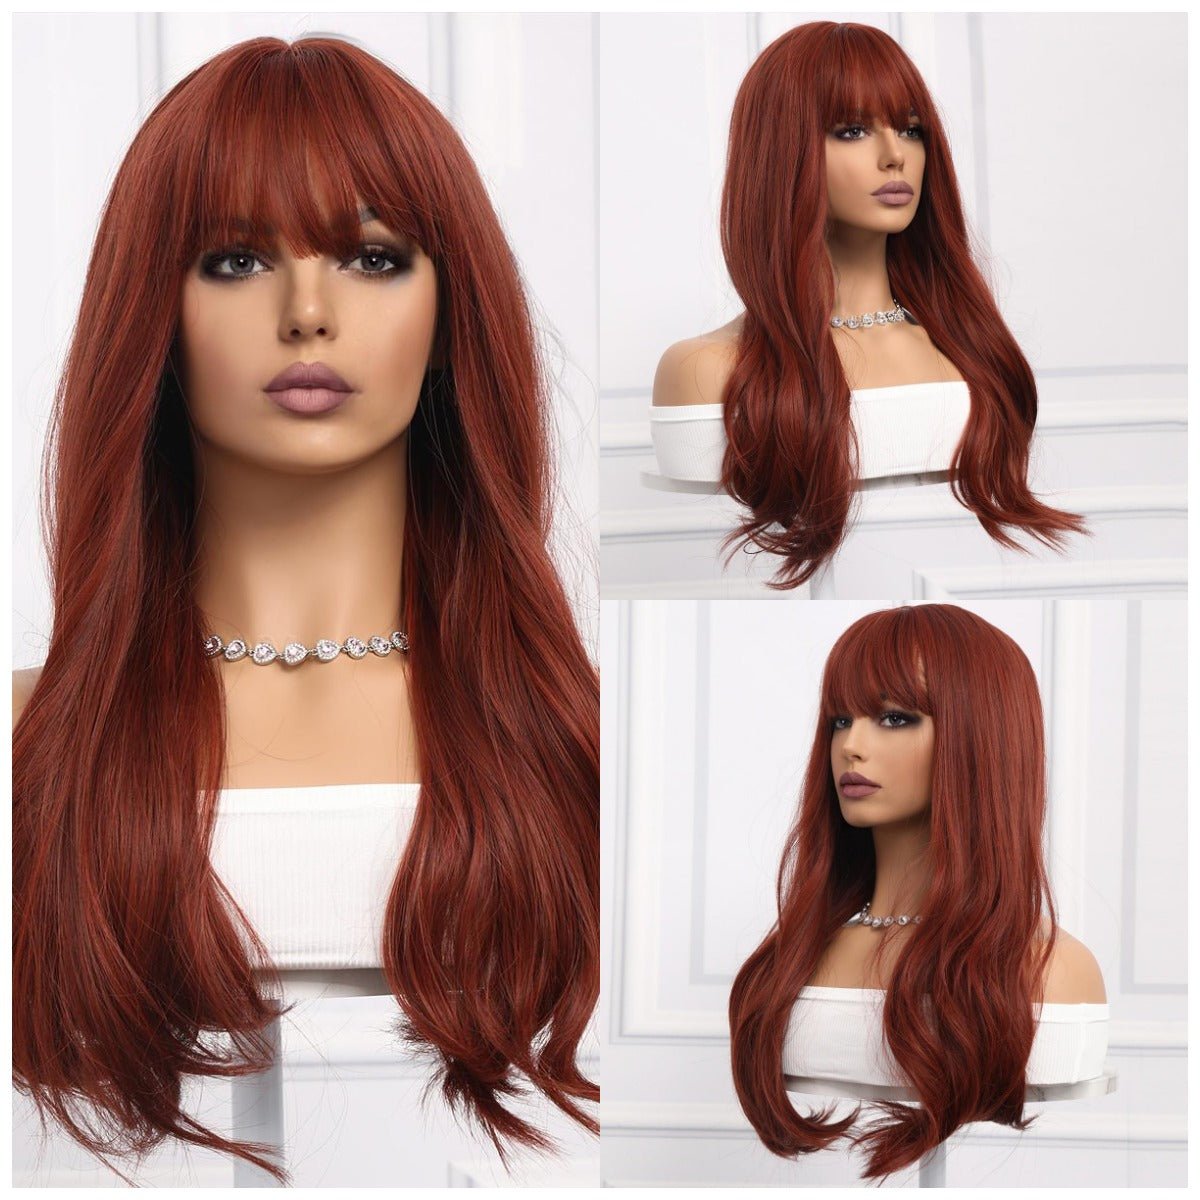 24-inch | Brown Loose Wave with Hair Bangs | SM8029 - TapLike